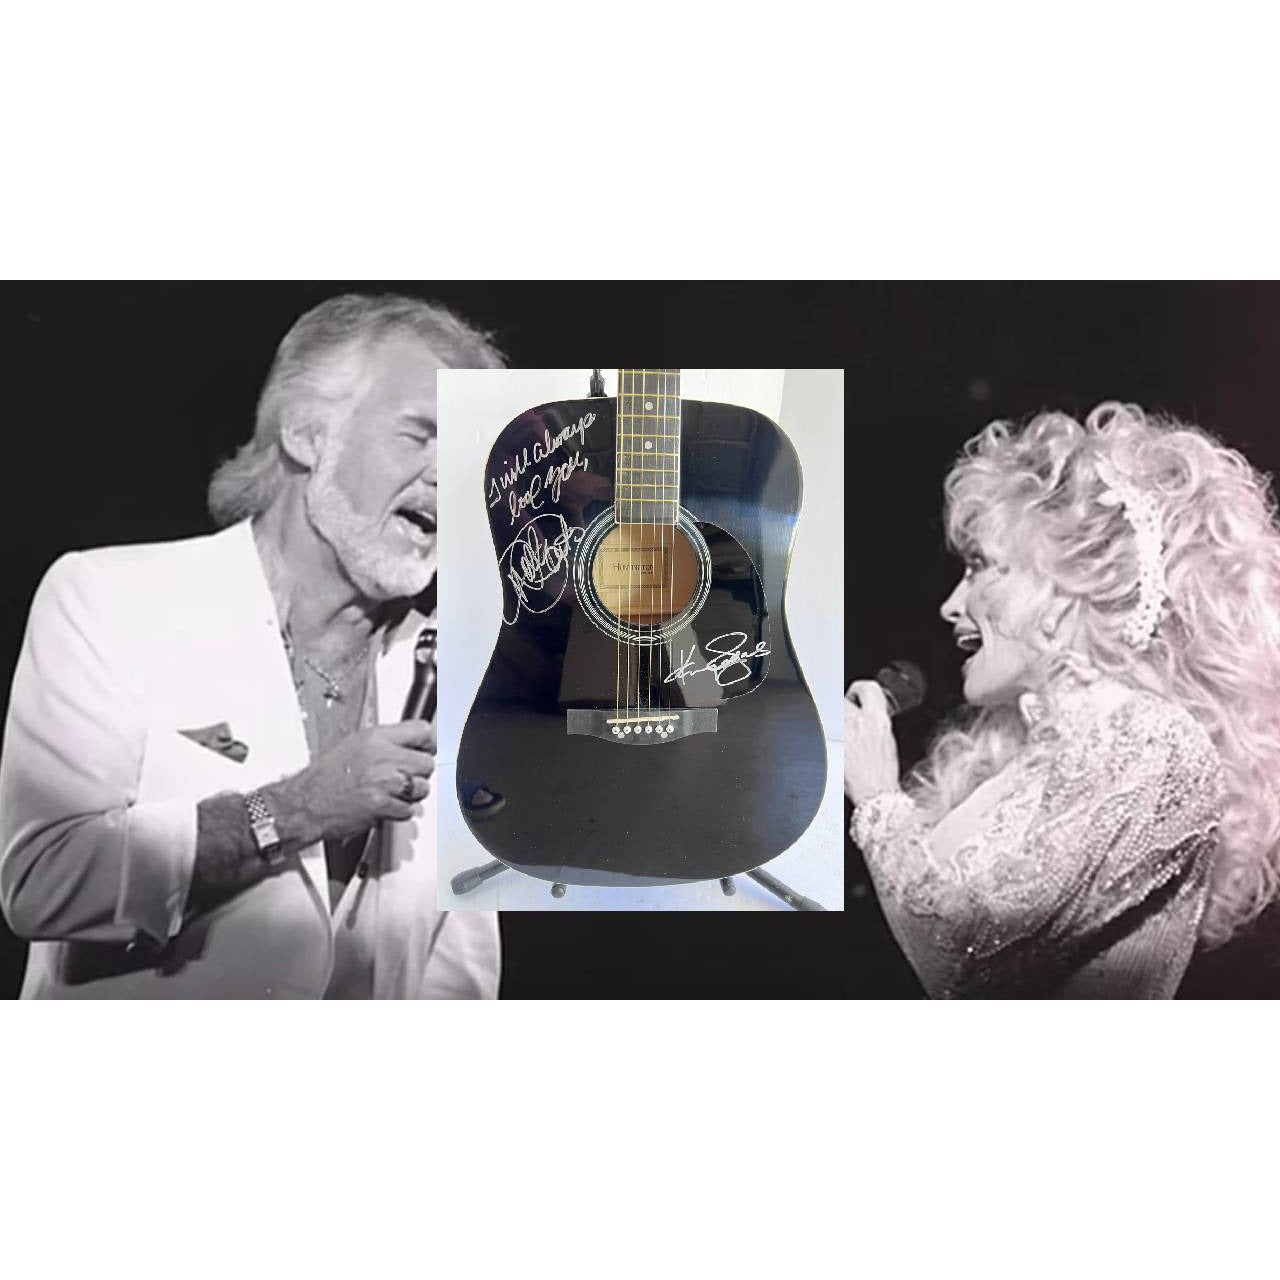 Kenny Rogers Dolly Parton full size acoustic guitar signed with proof